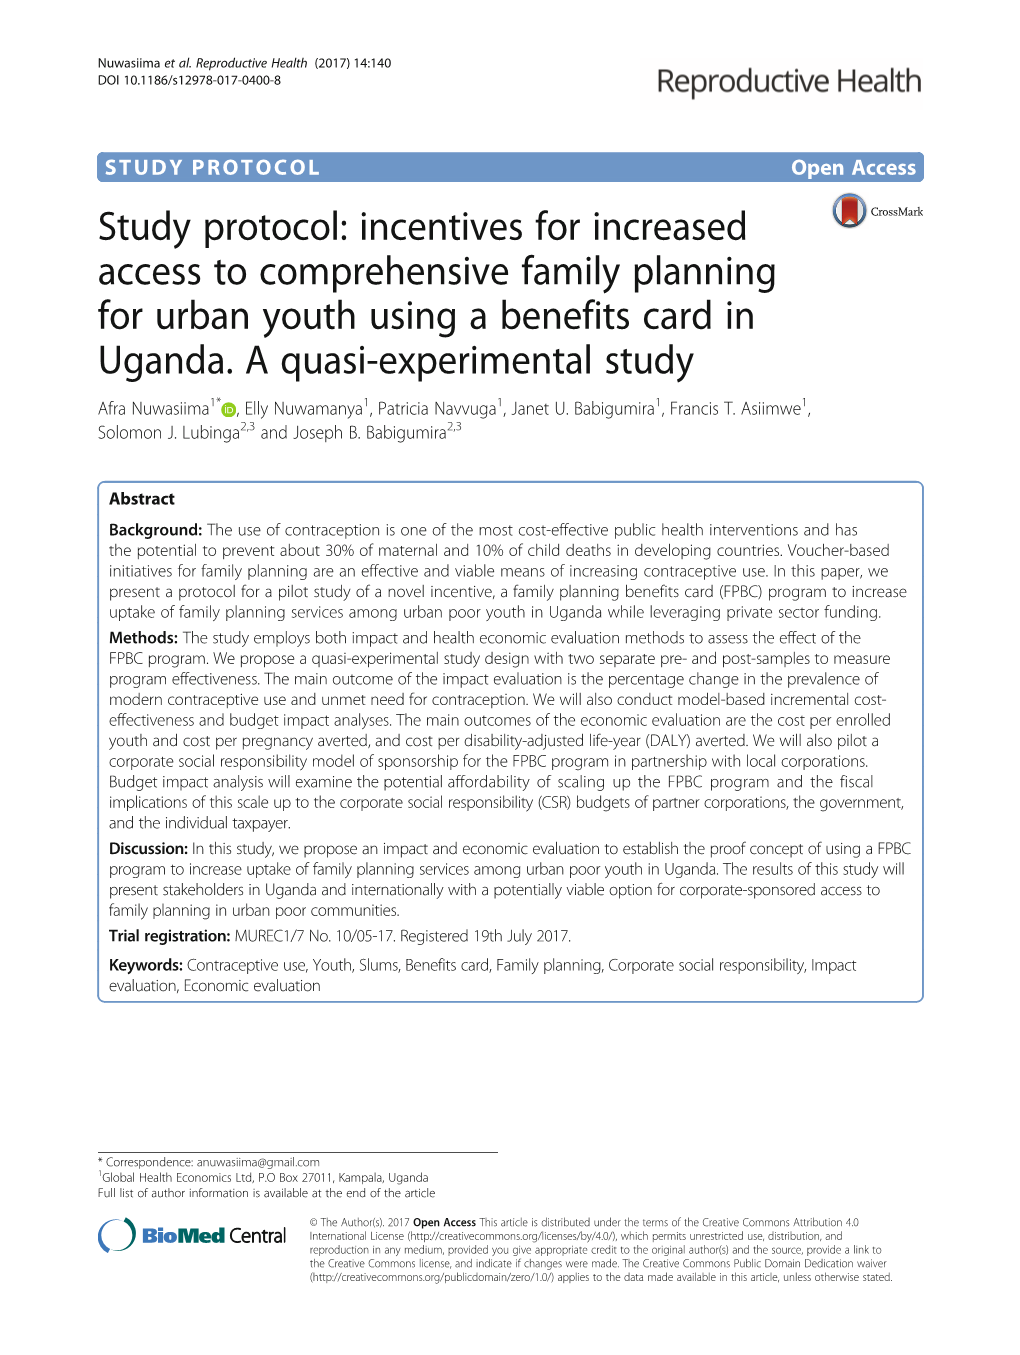 STUDY PROTOCOL Open Access Study Protocol: Incentives for Increased Access to Comprehensive Family Planning for Urban Youth Using a Benefits Card in Uganda